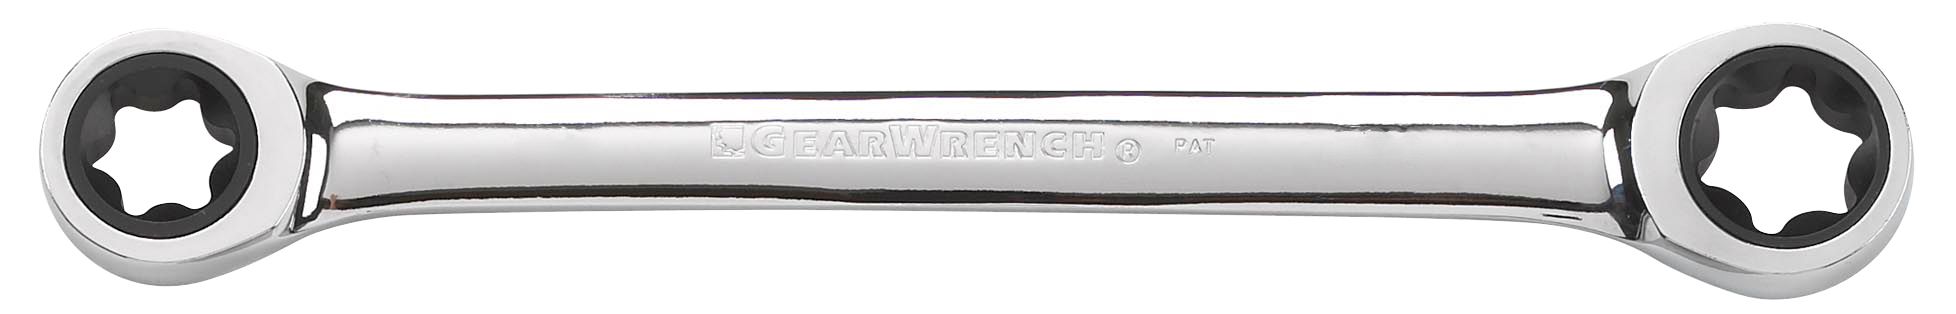 GearWrench E6 x E8 Torx Box-End Wrench, Ratcheting